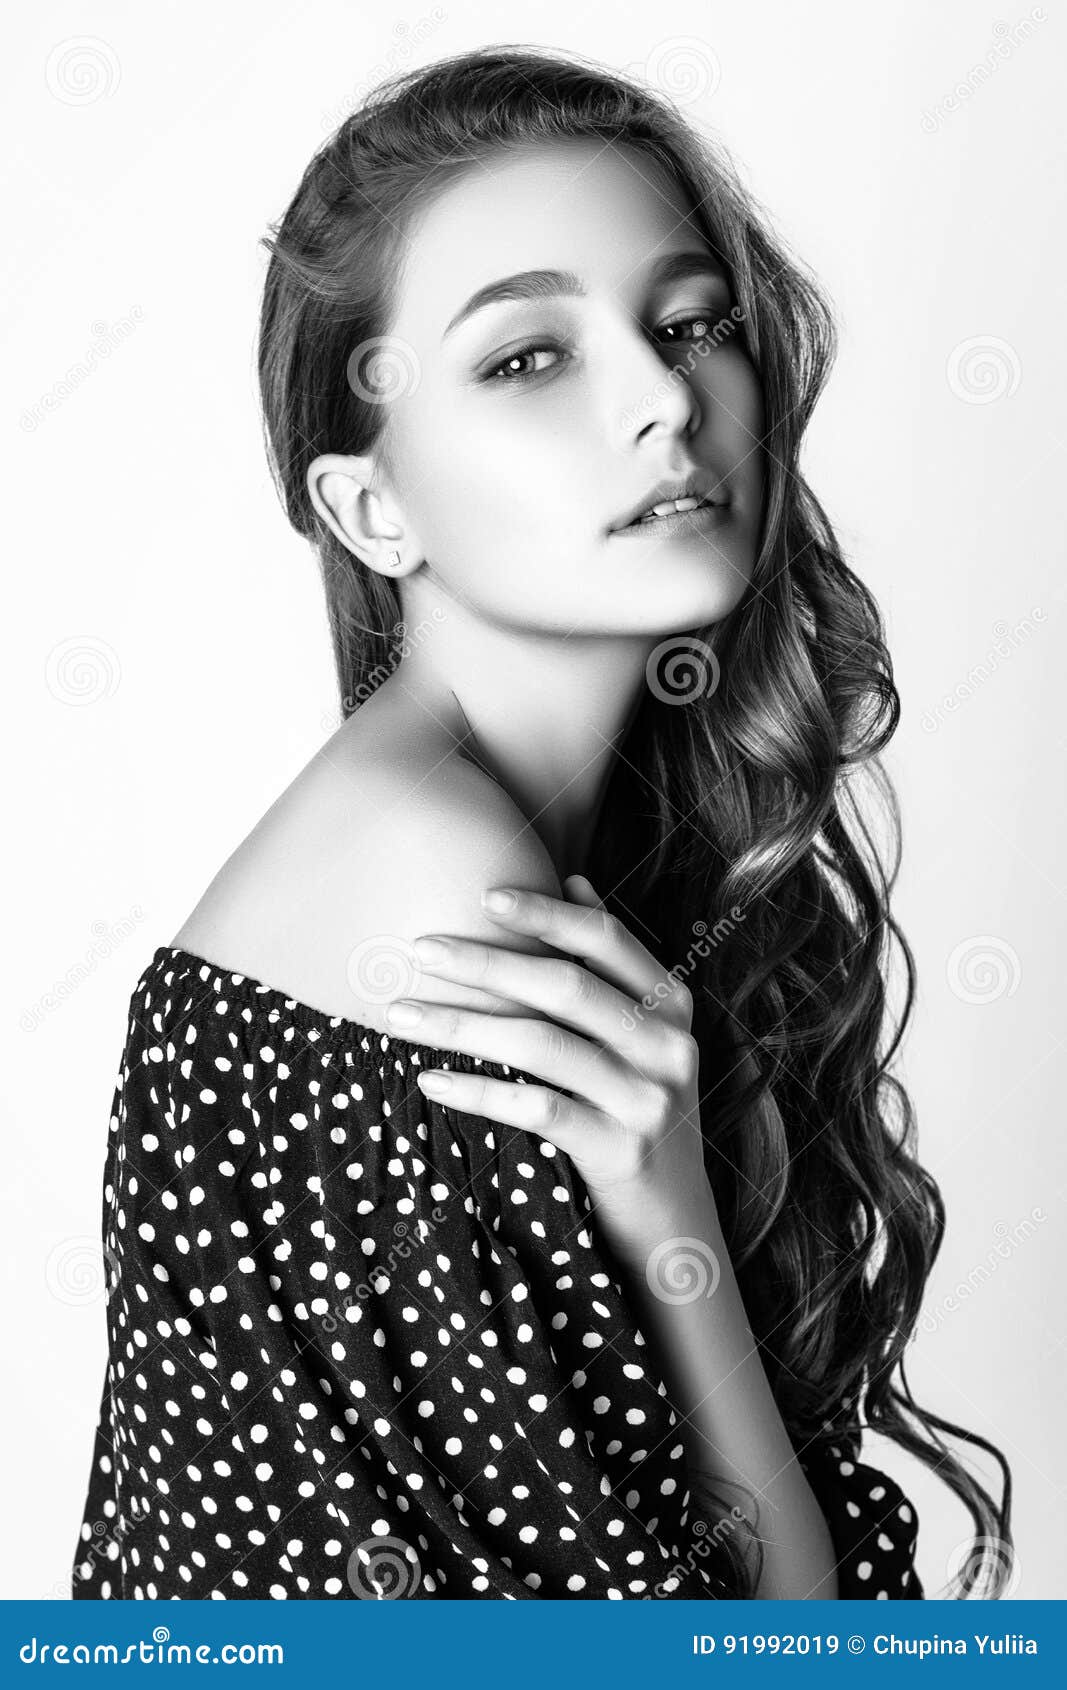 Cute Girl Teenage with Long Curly Hair Posing Studio Nature Portrait. Black  and White Stock Image - Image of long, model: 91992019